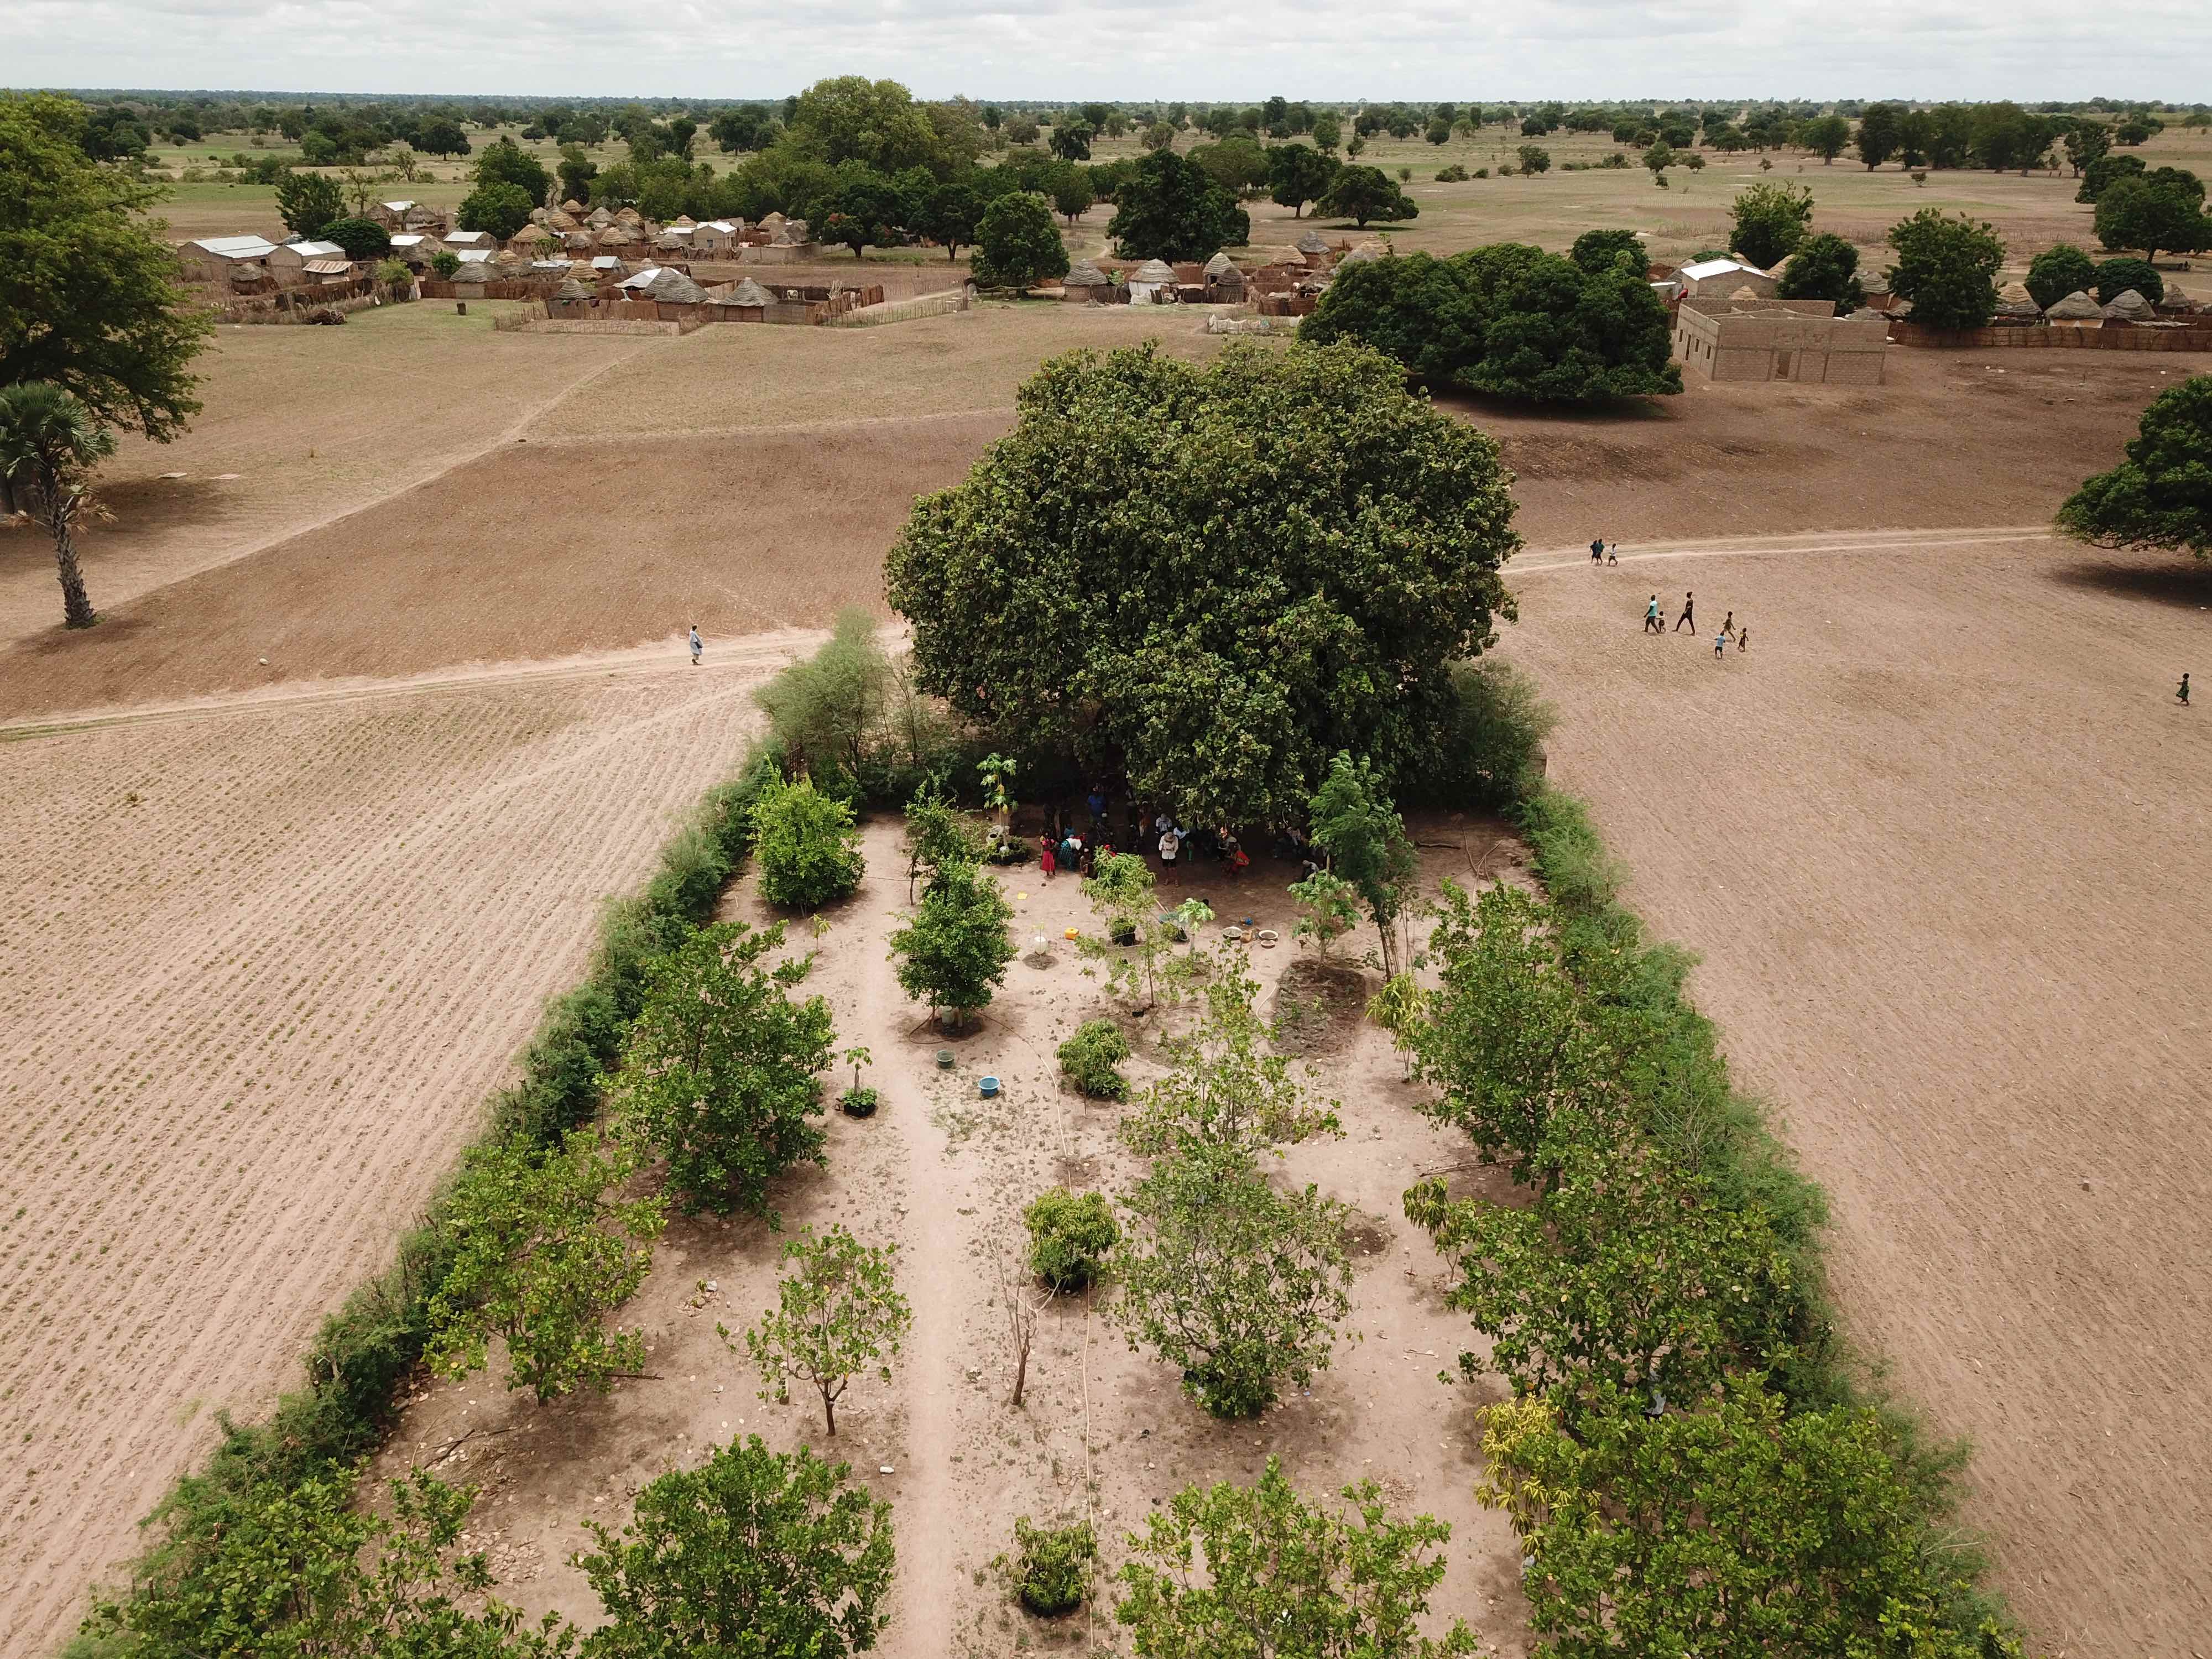 An aerial view of a young Forest Garden in Senegal shows trees' ability to transform degraded landscapes.

Forest Gardens are a collection of trees, shrubs, vines, vegetables, fruits, and herbs that grow harmoniously together. Forest Gardens use agroforestry and permaculture to get the most out of the land, while still giving just as much back to the land. International development organization Trees for the Future uses the Forest Garden Approach to completely transform parched, degraded land into unrecognizable, flourishing havens of biodiversity. In contrast to the more typical and overwhelmingly accepted monocrop agriculture, permaculture and Forest Gardening have positive impacts on the environment and the communities in which they are employed.